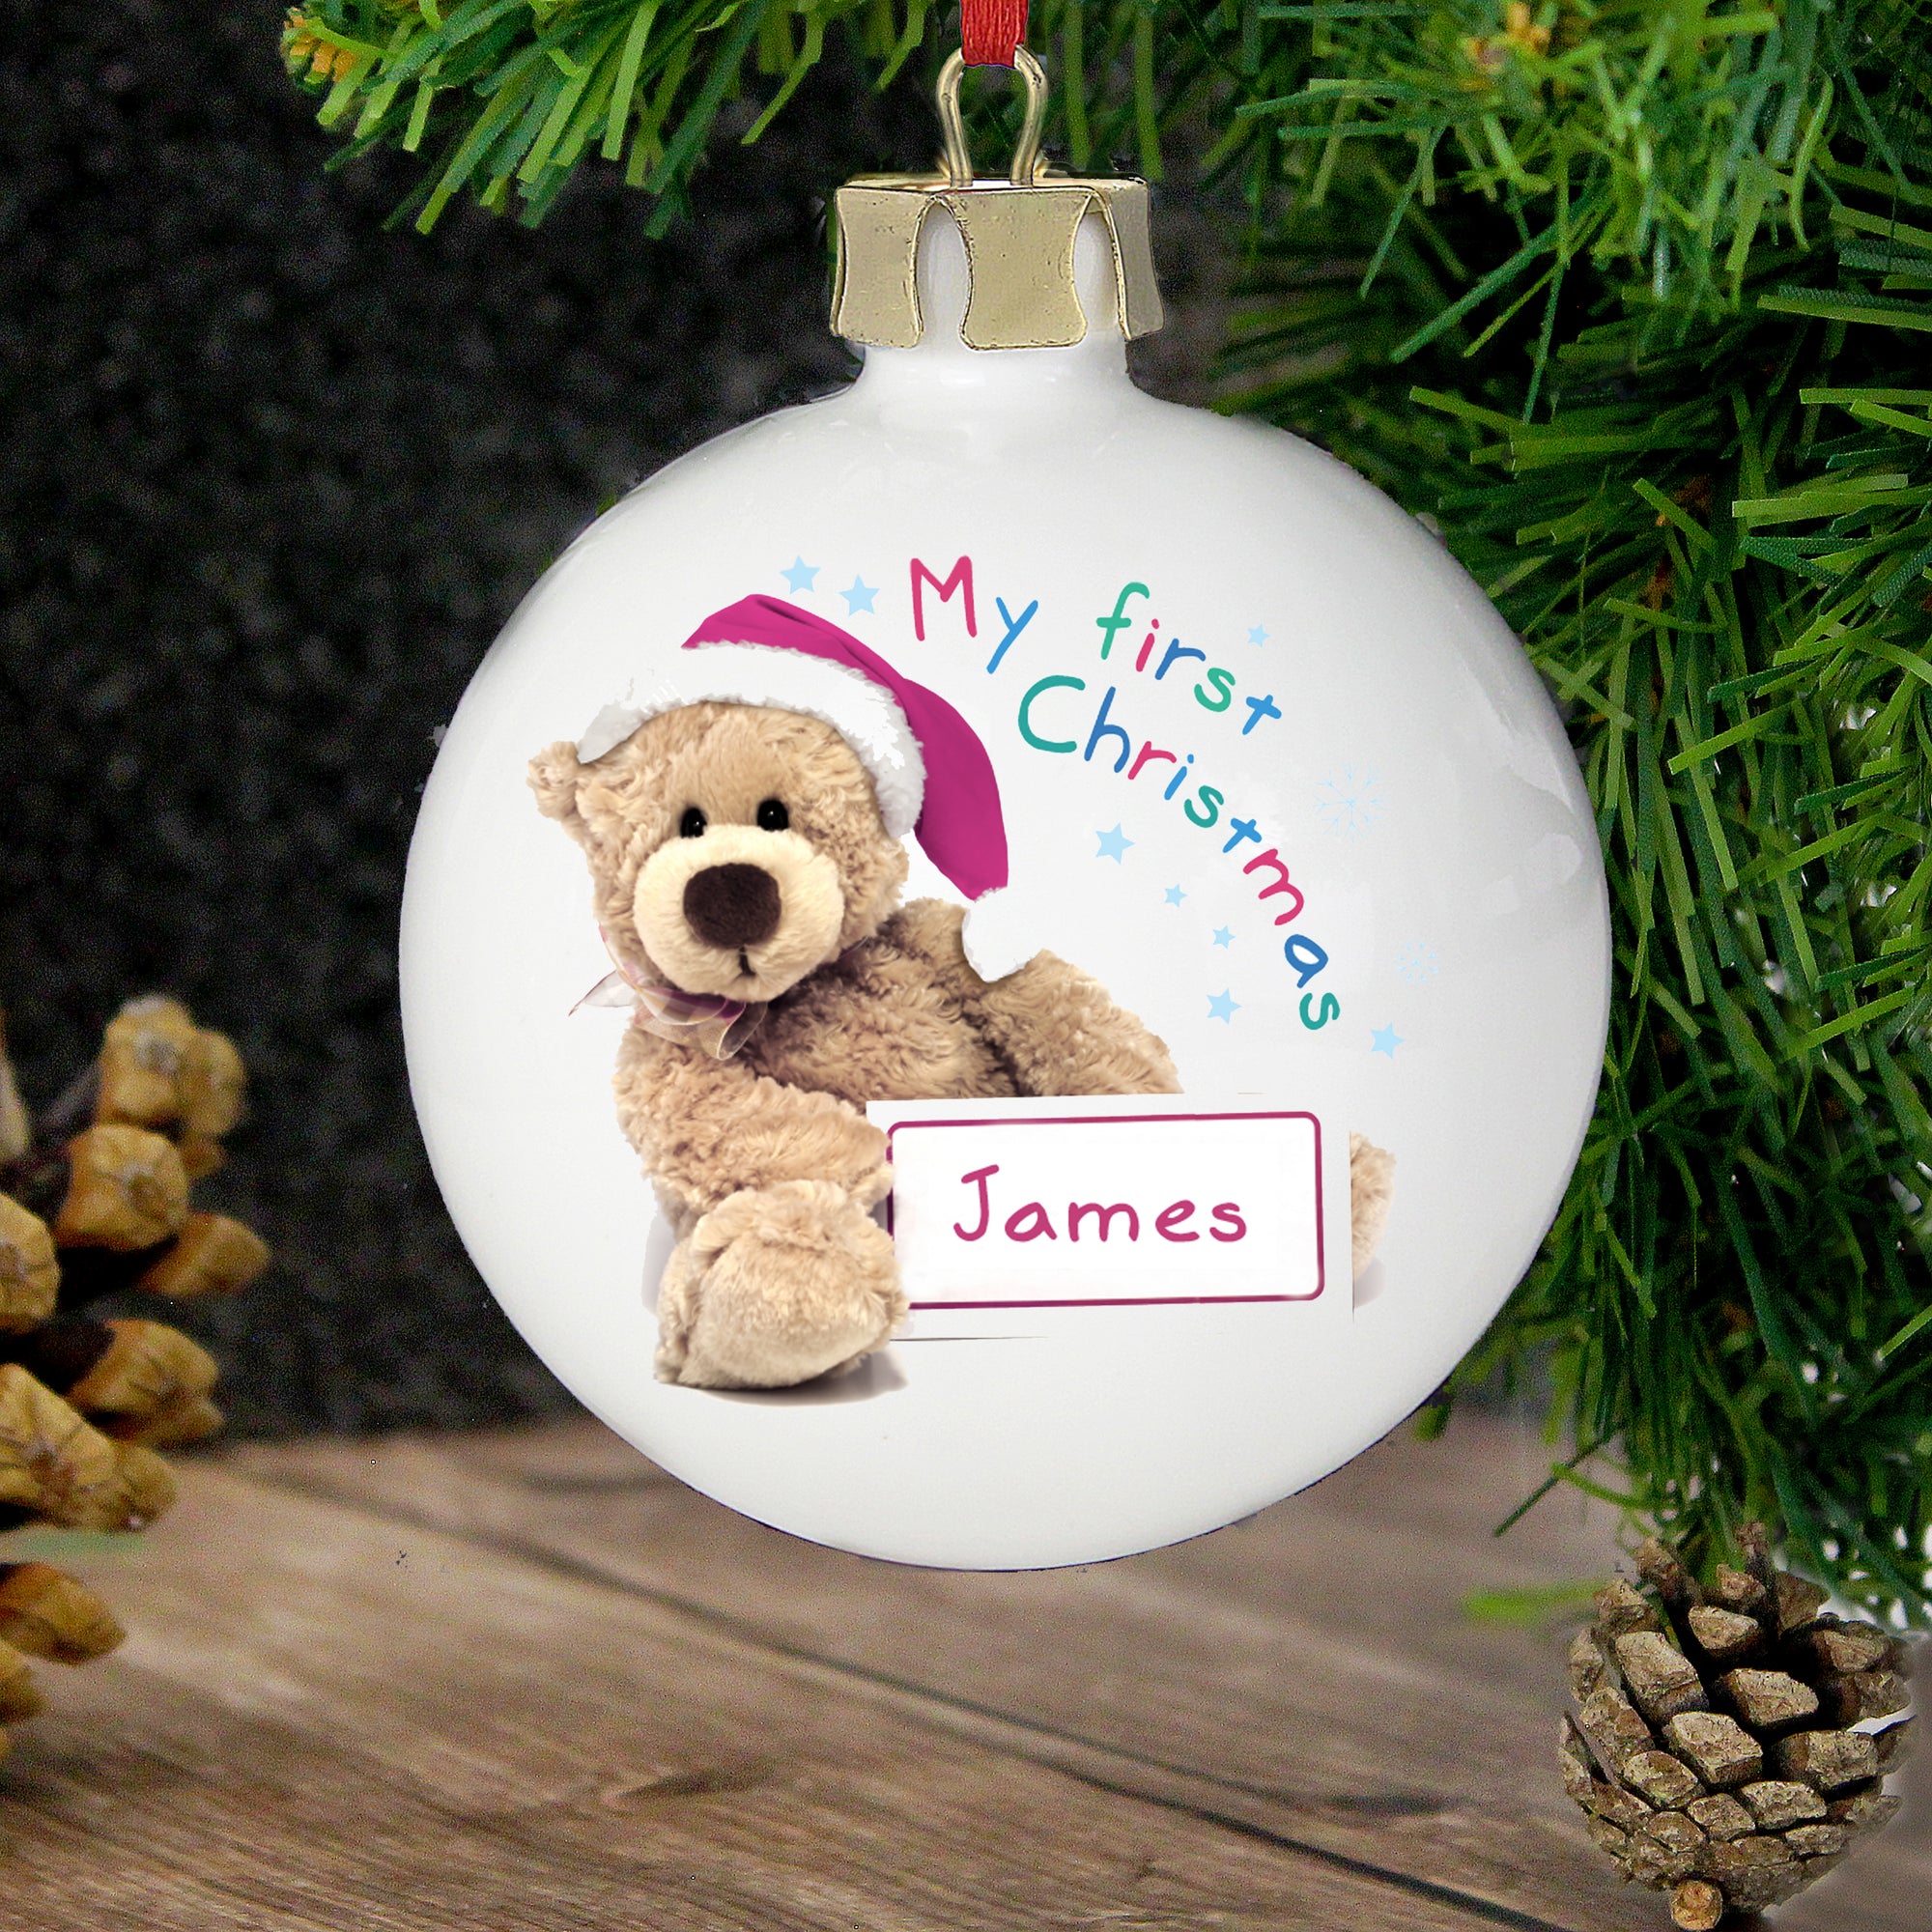 Personalised Christmas decoration featuring the text 'My first Christmas' in bright lettering and underneath that, a cute teddy bear wearing a red Christmas hat on the front, holding a sign that can be personalised with a name of your choice. The rear of the bauble can be personalised with your own special message over up to 4 lines.